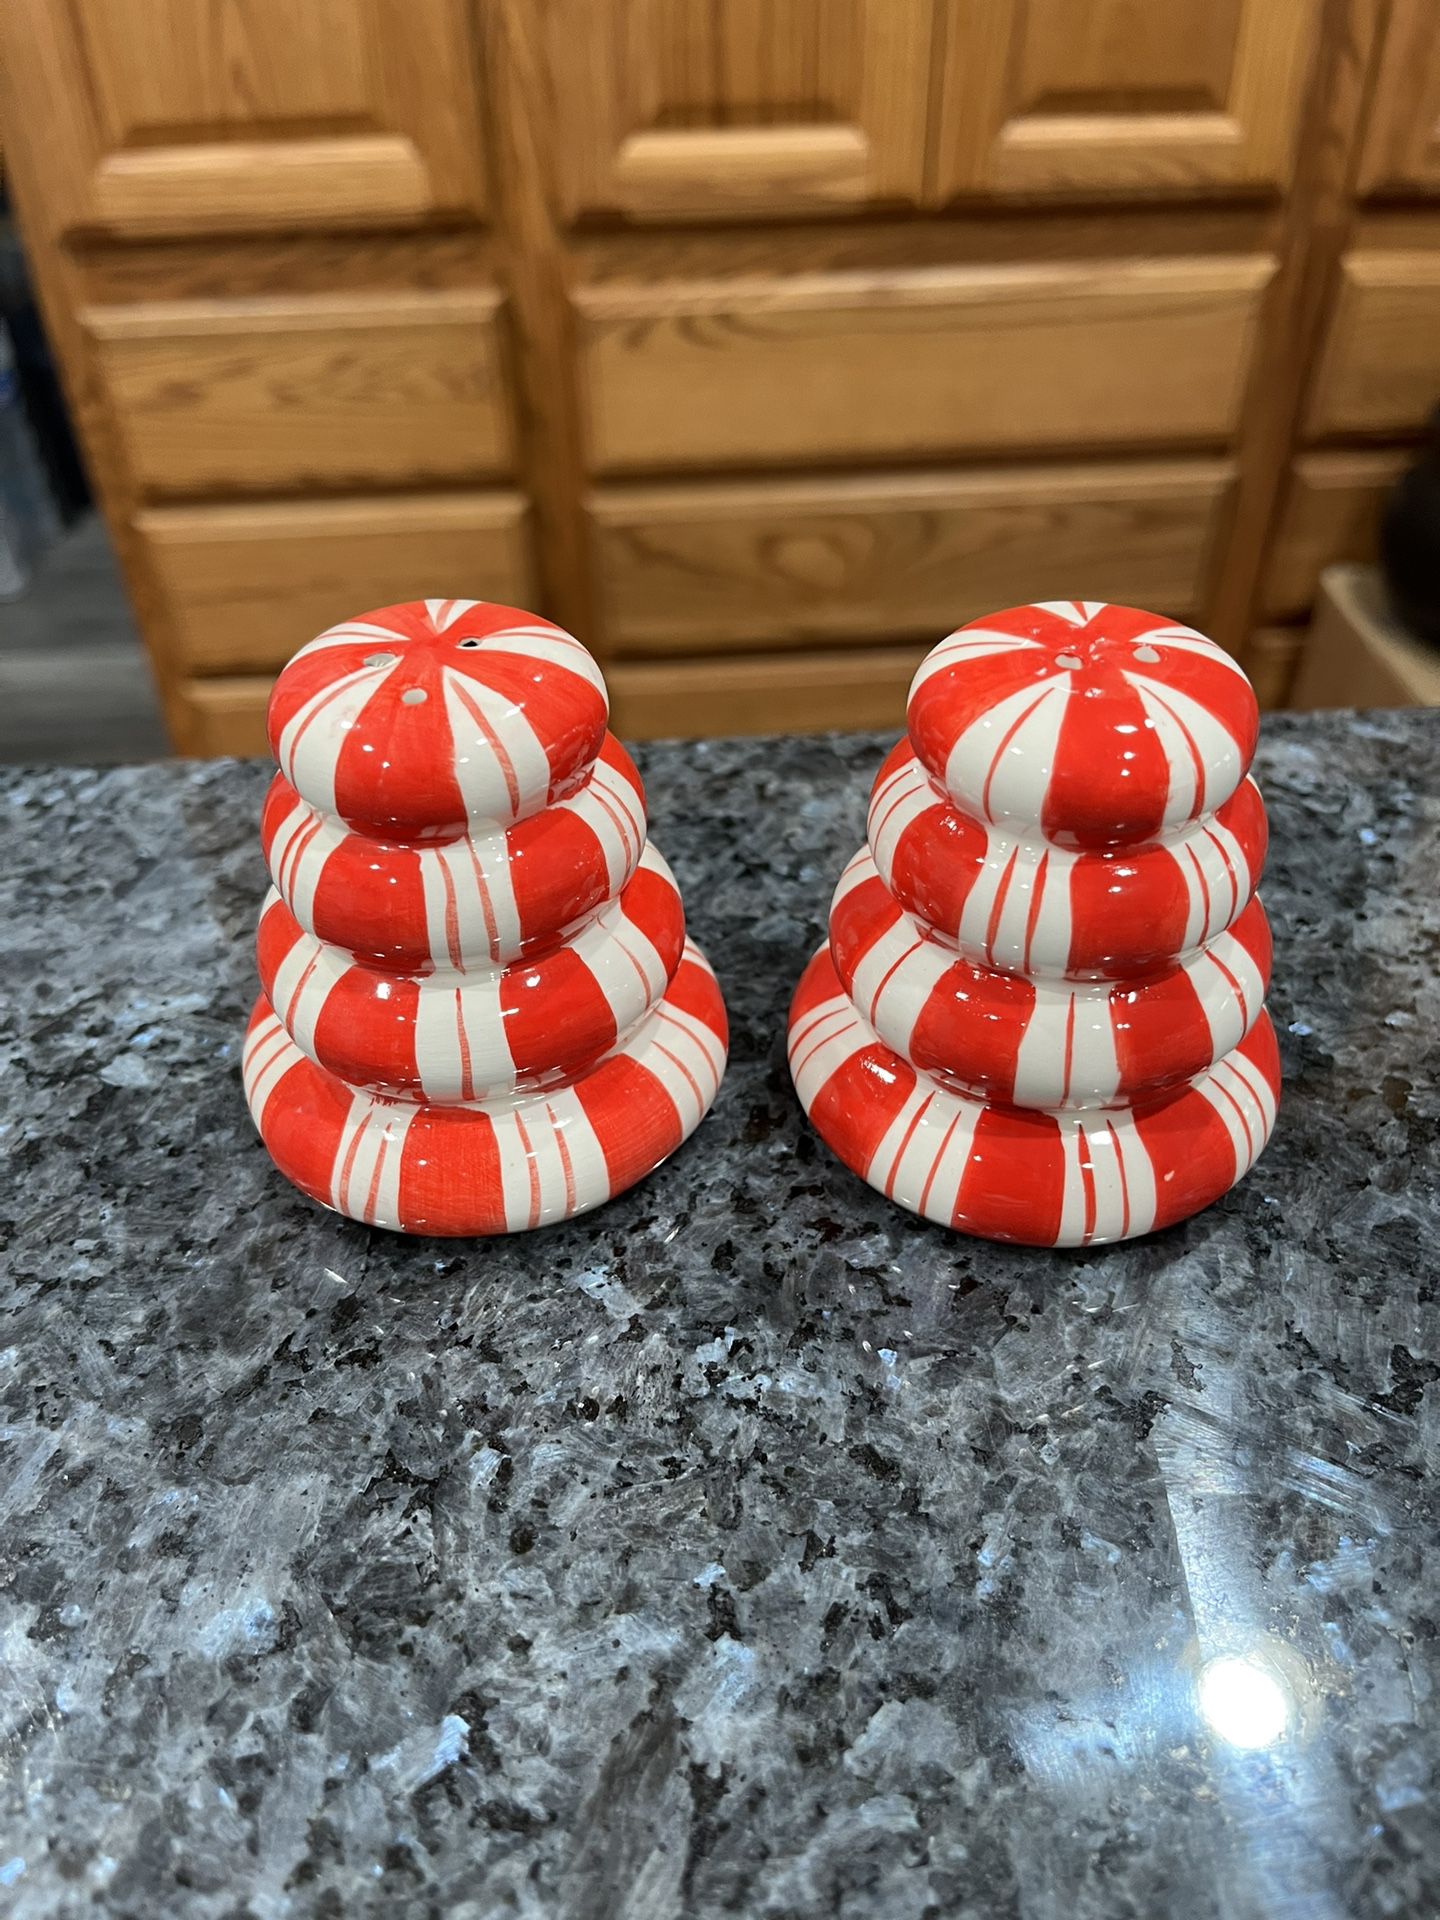 Vintage Ceramic Christmas Peppermint Candy Pair Of Salt And Pepper Shakers.  Brand New Never Used